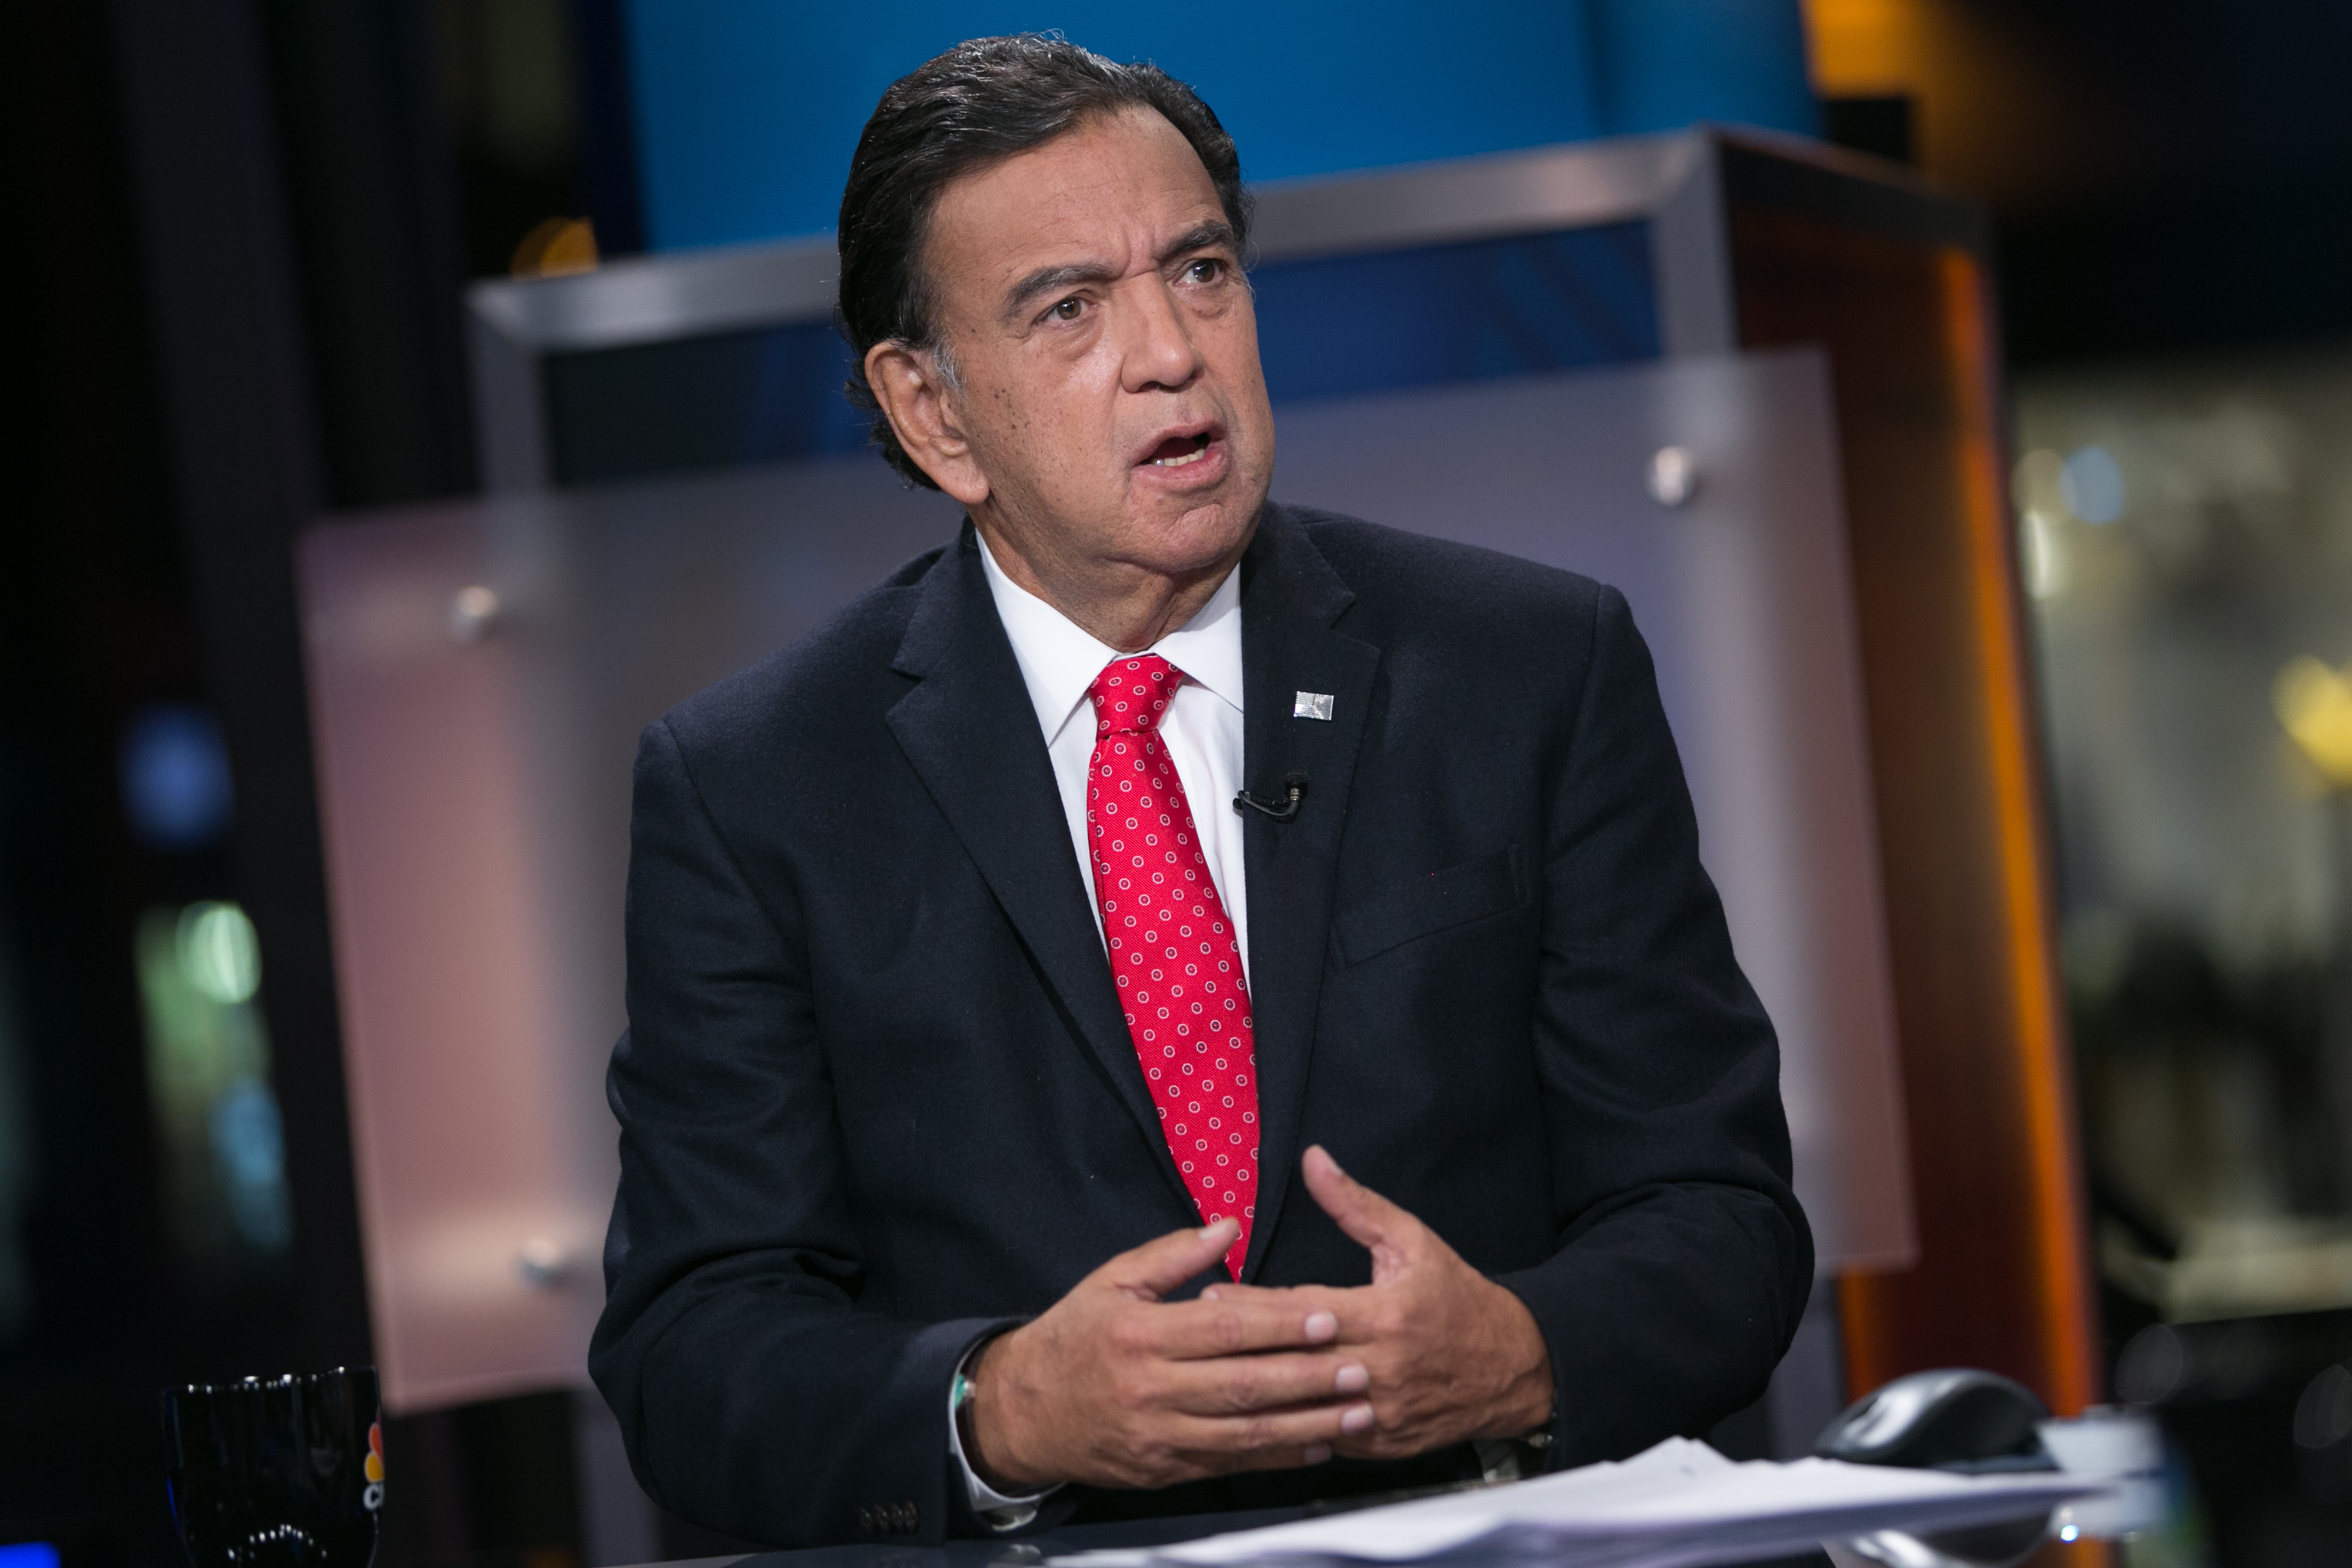 Bill Richardson, former Governor of New Mexico, in an interview on Jan.13, 2015. (CNBC—NBCU Photo Bank via Getty Images)